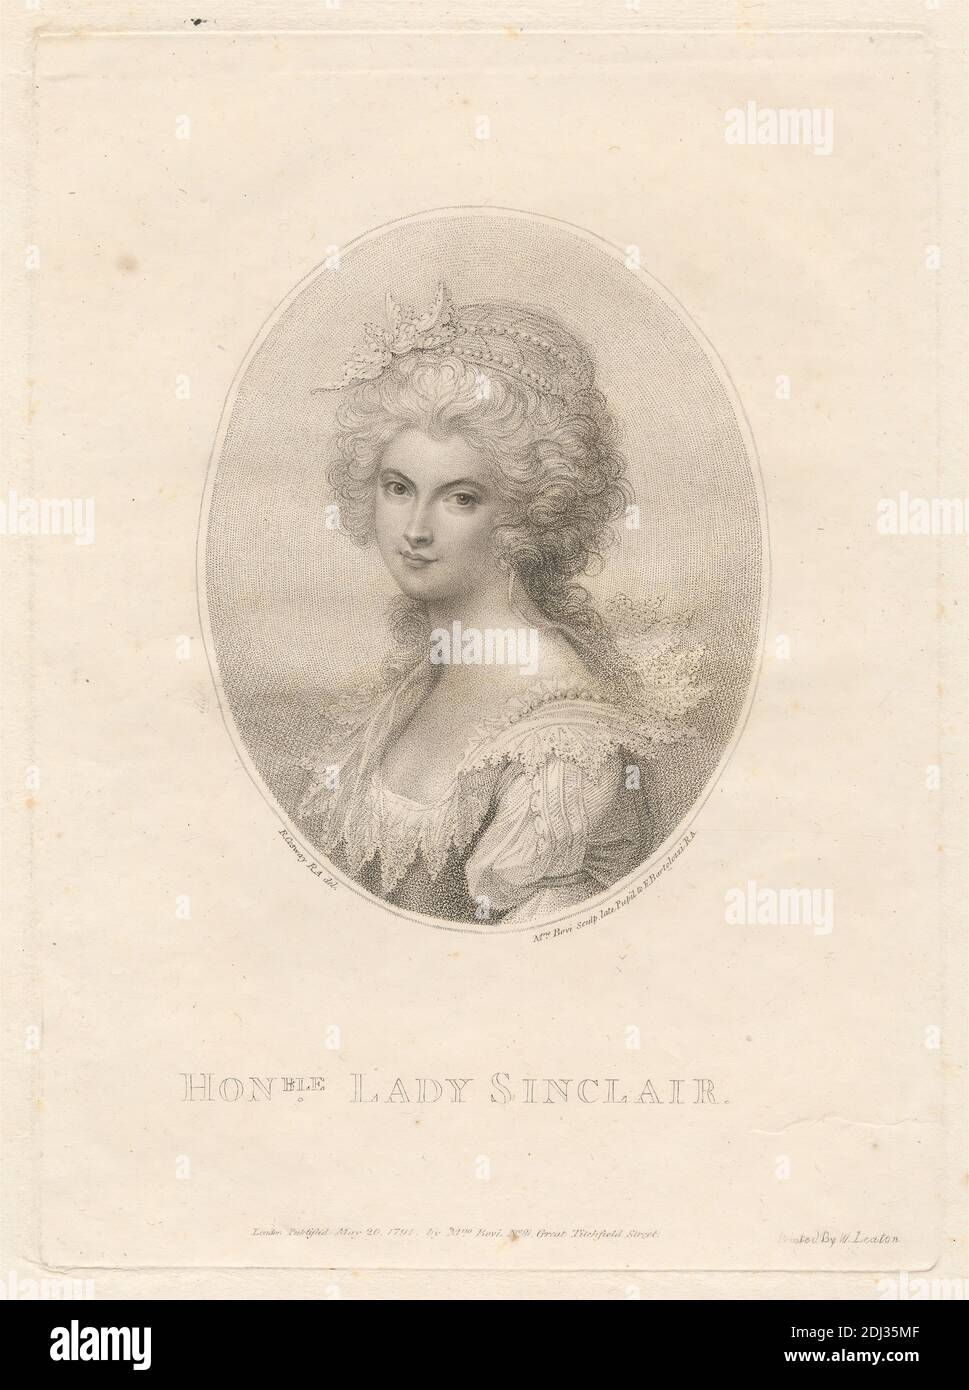 Lady Sinclair, Print made by Marino Bovi, Italian, 1758–ca.1805, Italian, after Richard Cosway, 1742–1821, British, Printed by W. Leaton, active 1791, Published by Marino Bovi, Italian, 1758–ca.1805, Italian, 1791, Stipple engraving on moderately thick, moderately textured, cream laid paper, Sheet: 12 7/16 x 9 1/16 inches (31.6 x 23 cm), Plate: 8 9/16 x 6 1/4 inches (21.7 x 15.9 cm), and Image: 5 1/16 x 4 inches (12.8 x 10.1 cm), beads, cap, curls, dress, headpiece, lace, nobility, oval, pearls, portrait, trim, woman Stock Photo